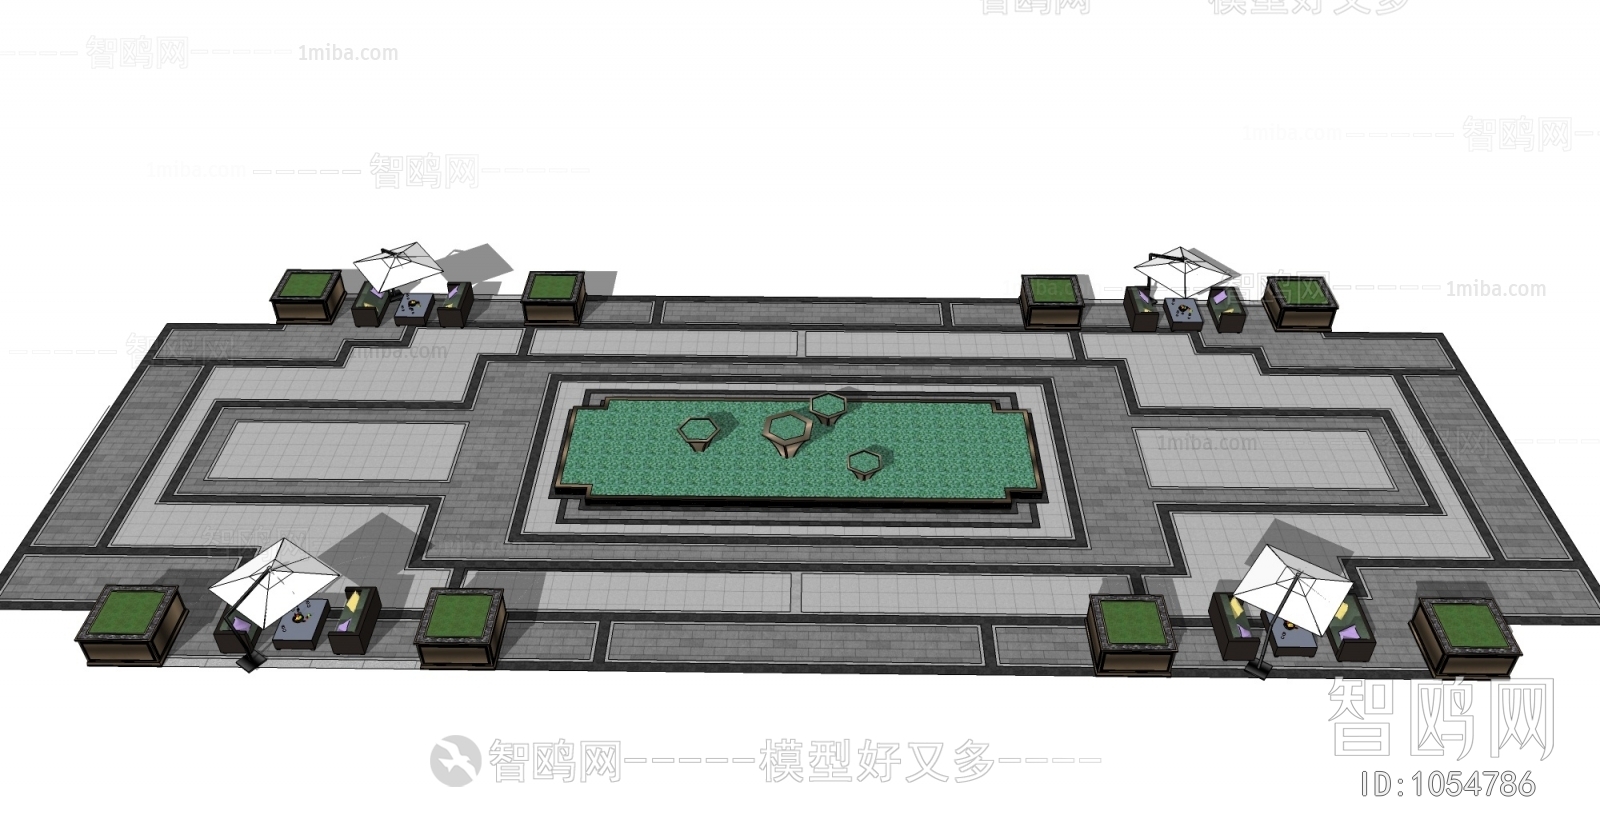 New Chinese Style Garden Landscape